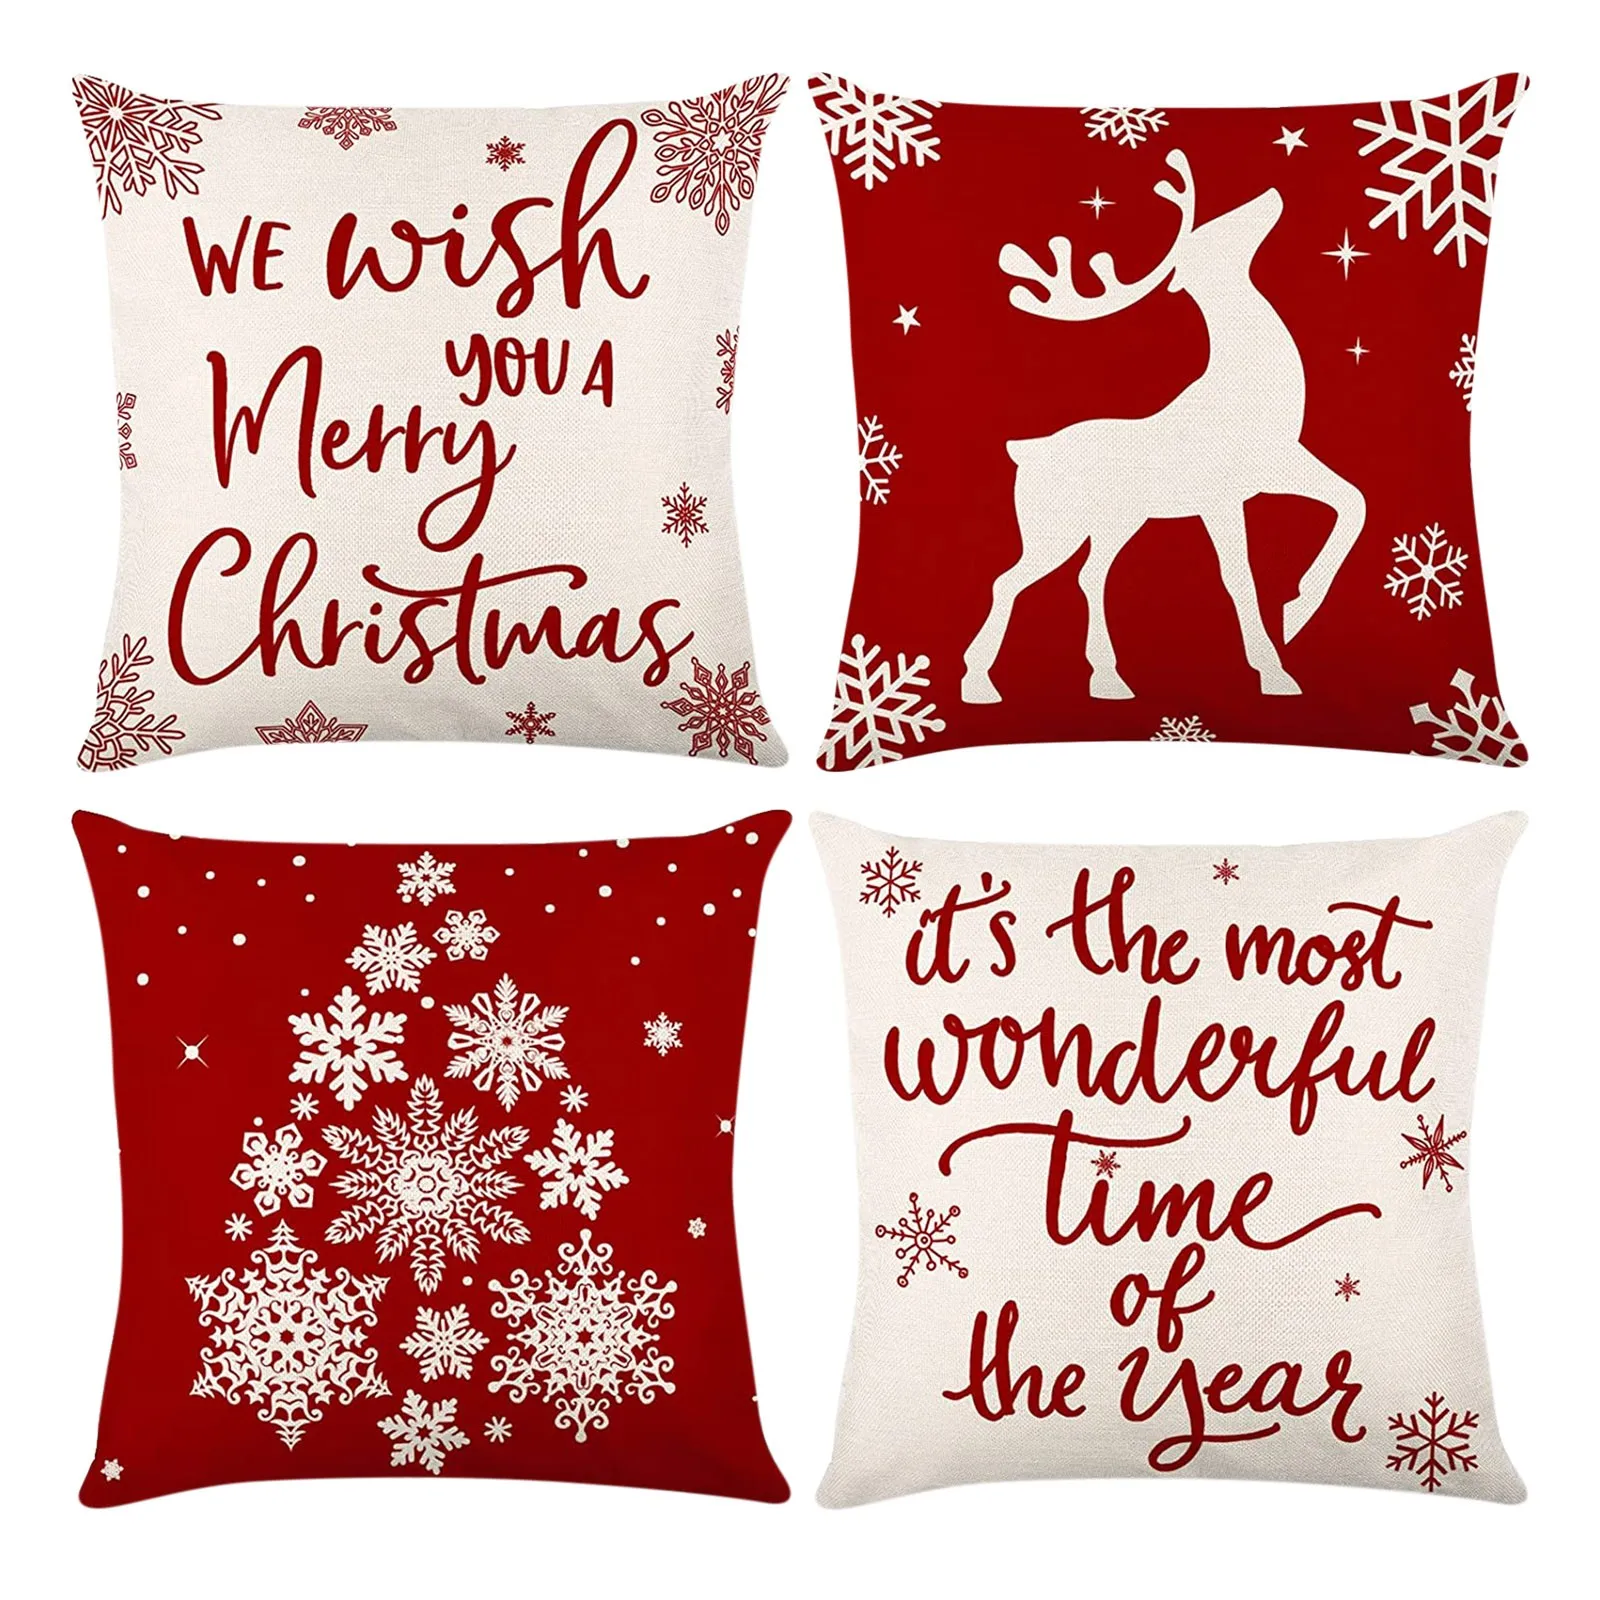 Pillow covers Merry Christmas & Happy New Year Linen Printed Home Lumbar Office Cushion free return 2 pieces 2021 Christmas Pillow cases